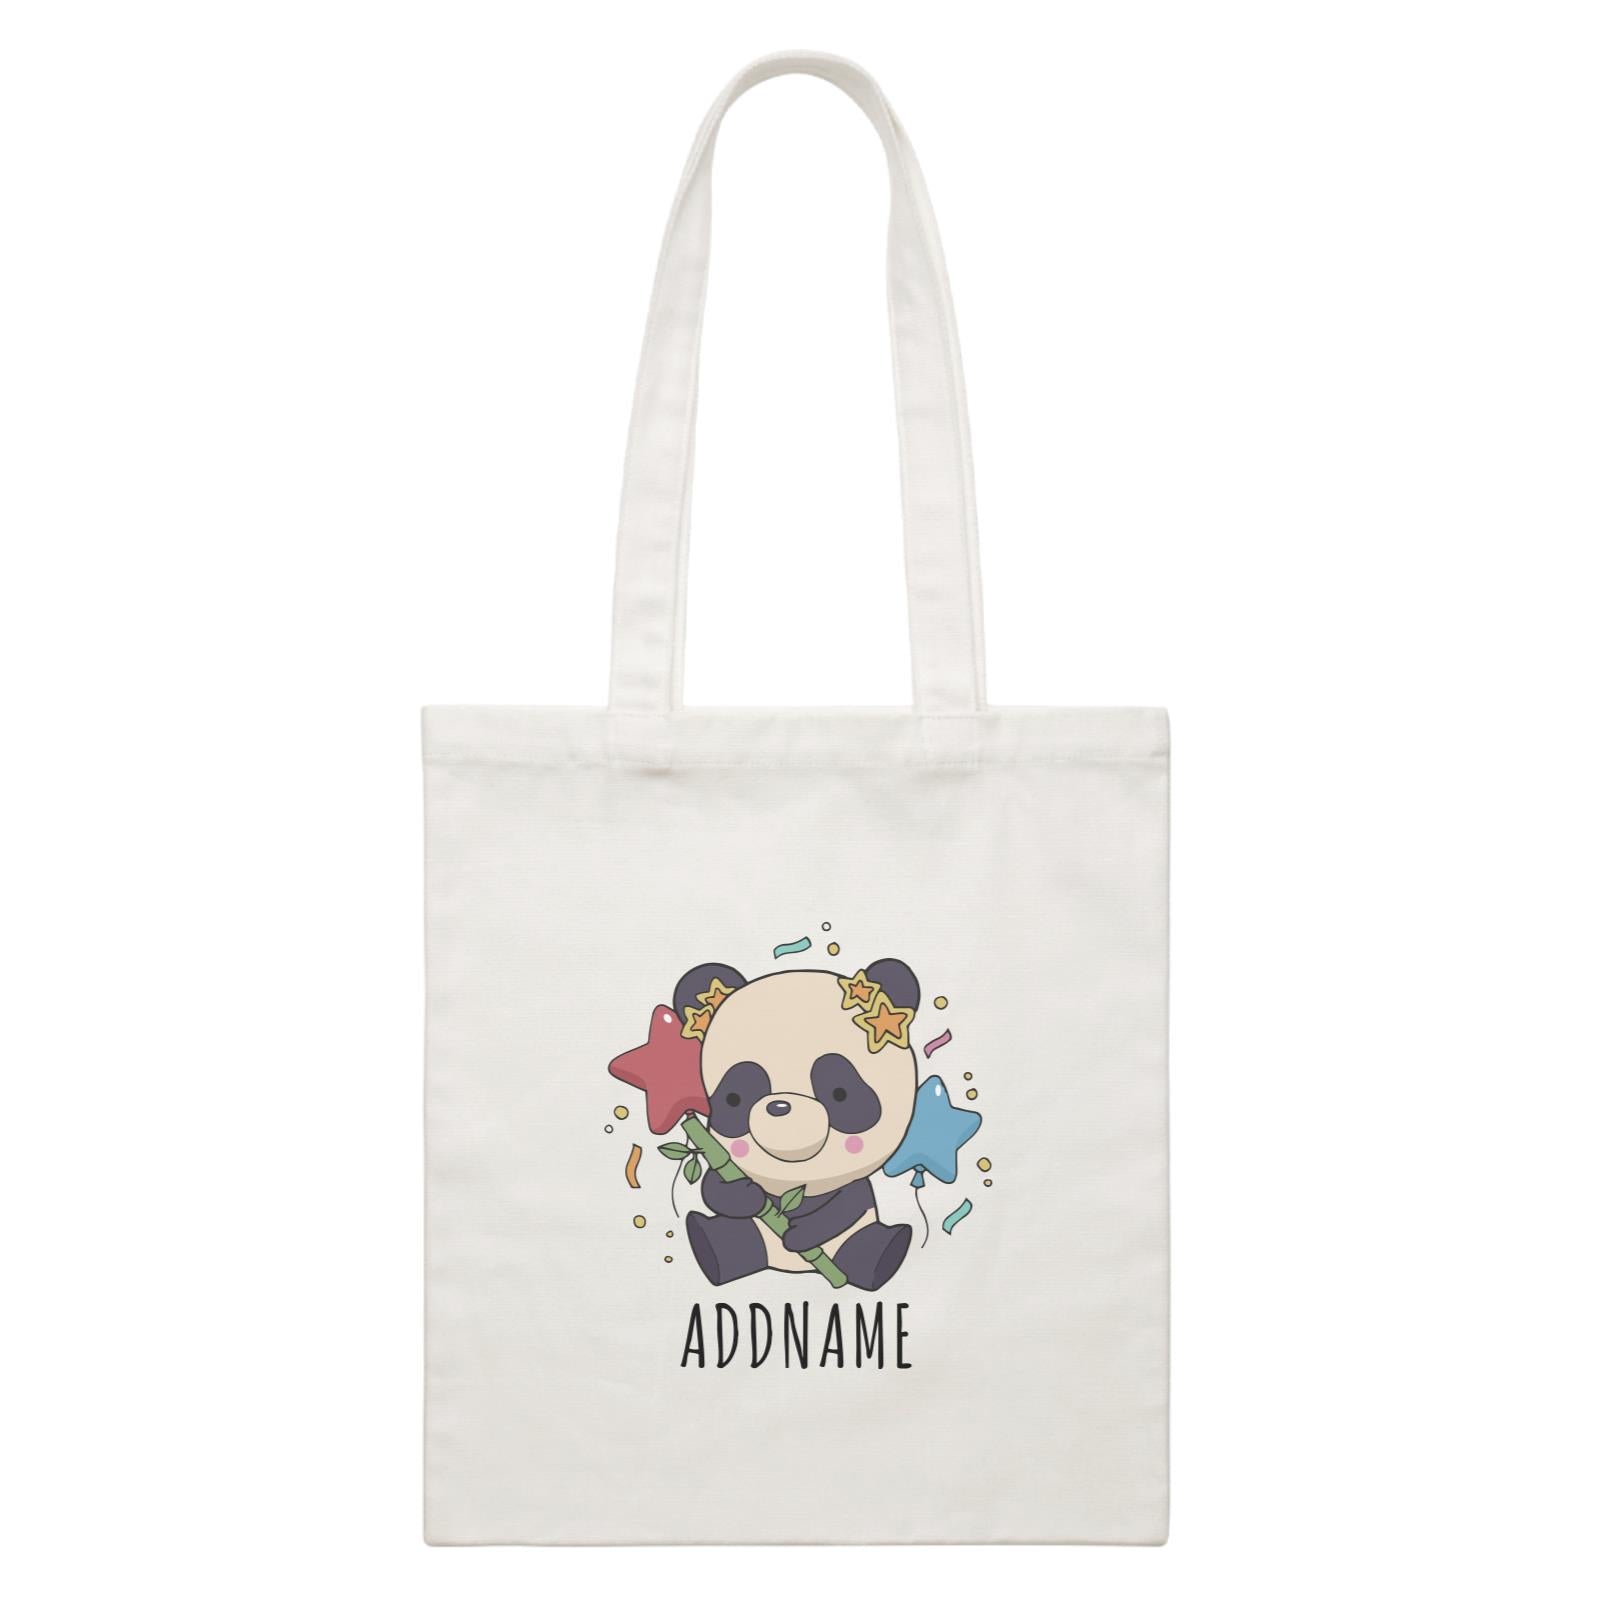 Birthday Sketch Animals Panda with Party Hat Holding Bamboo Addname White Canvas Bag